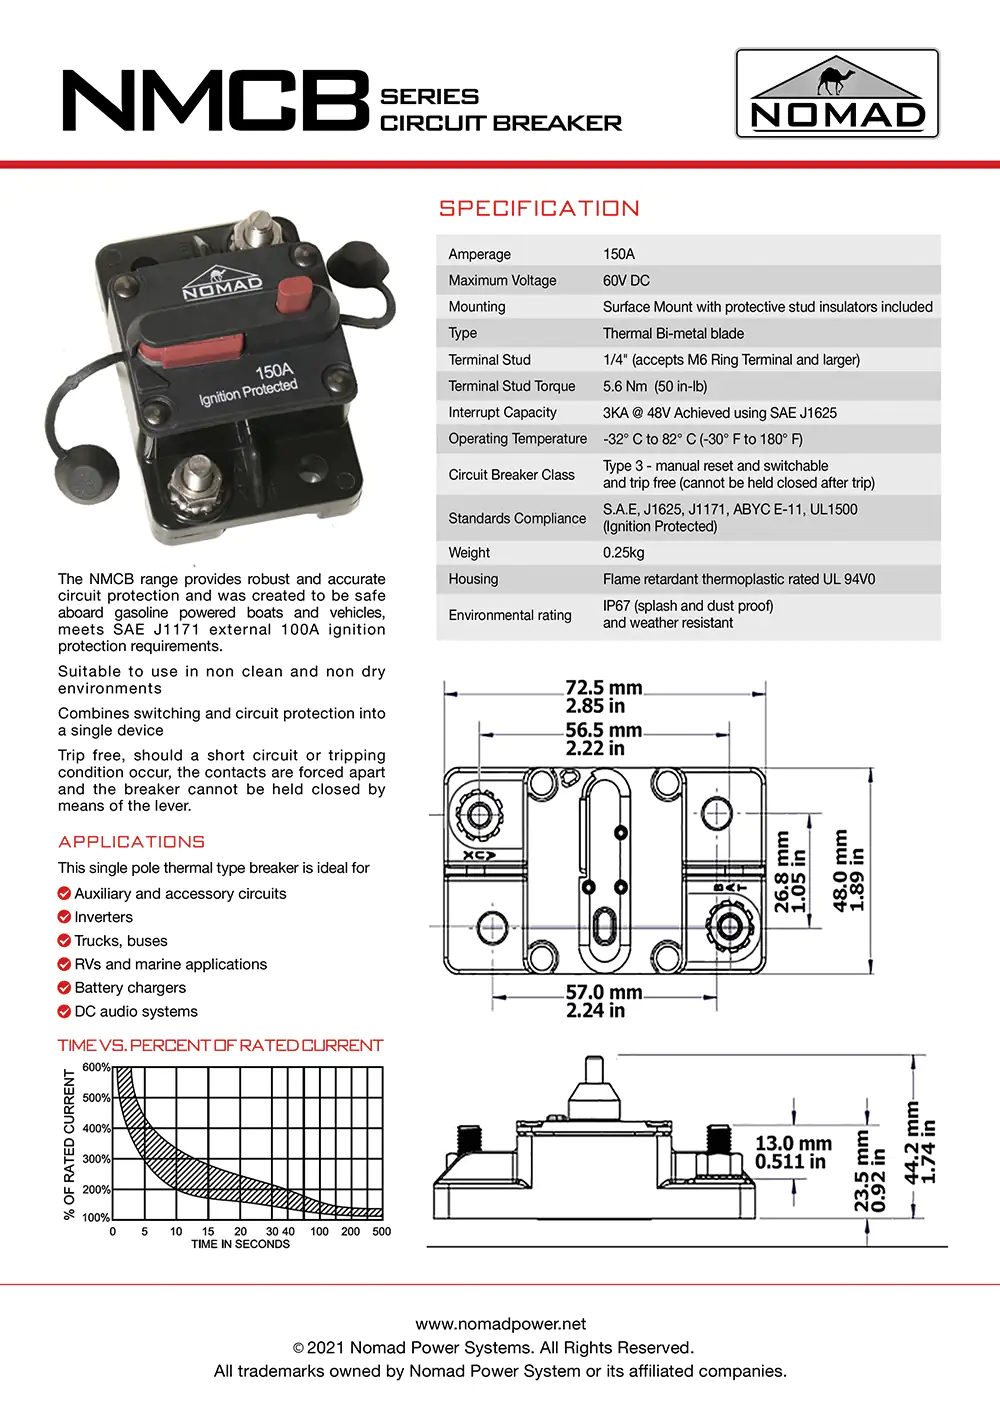 NOMAD 150A DC CIRCUIT BREAKER NMCB SPECIFICATION SHEET